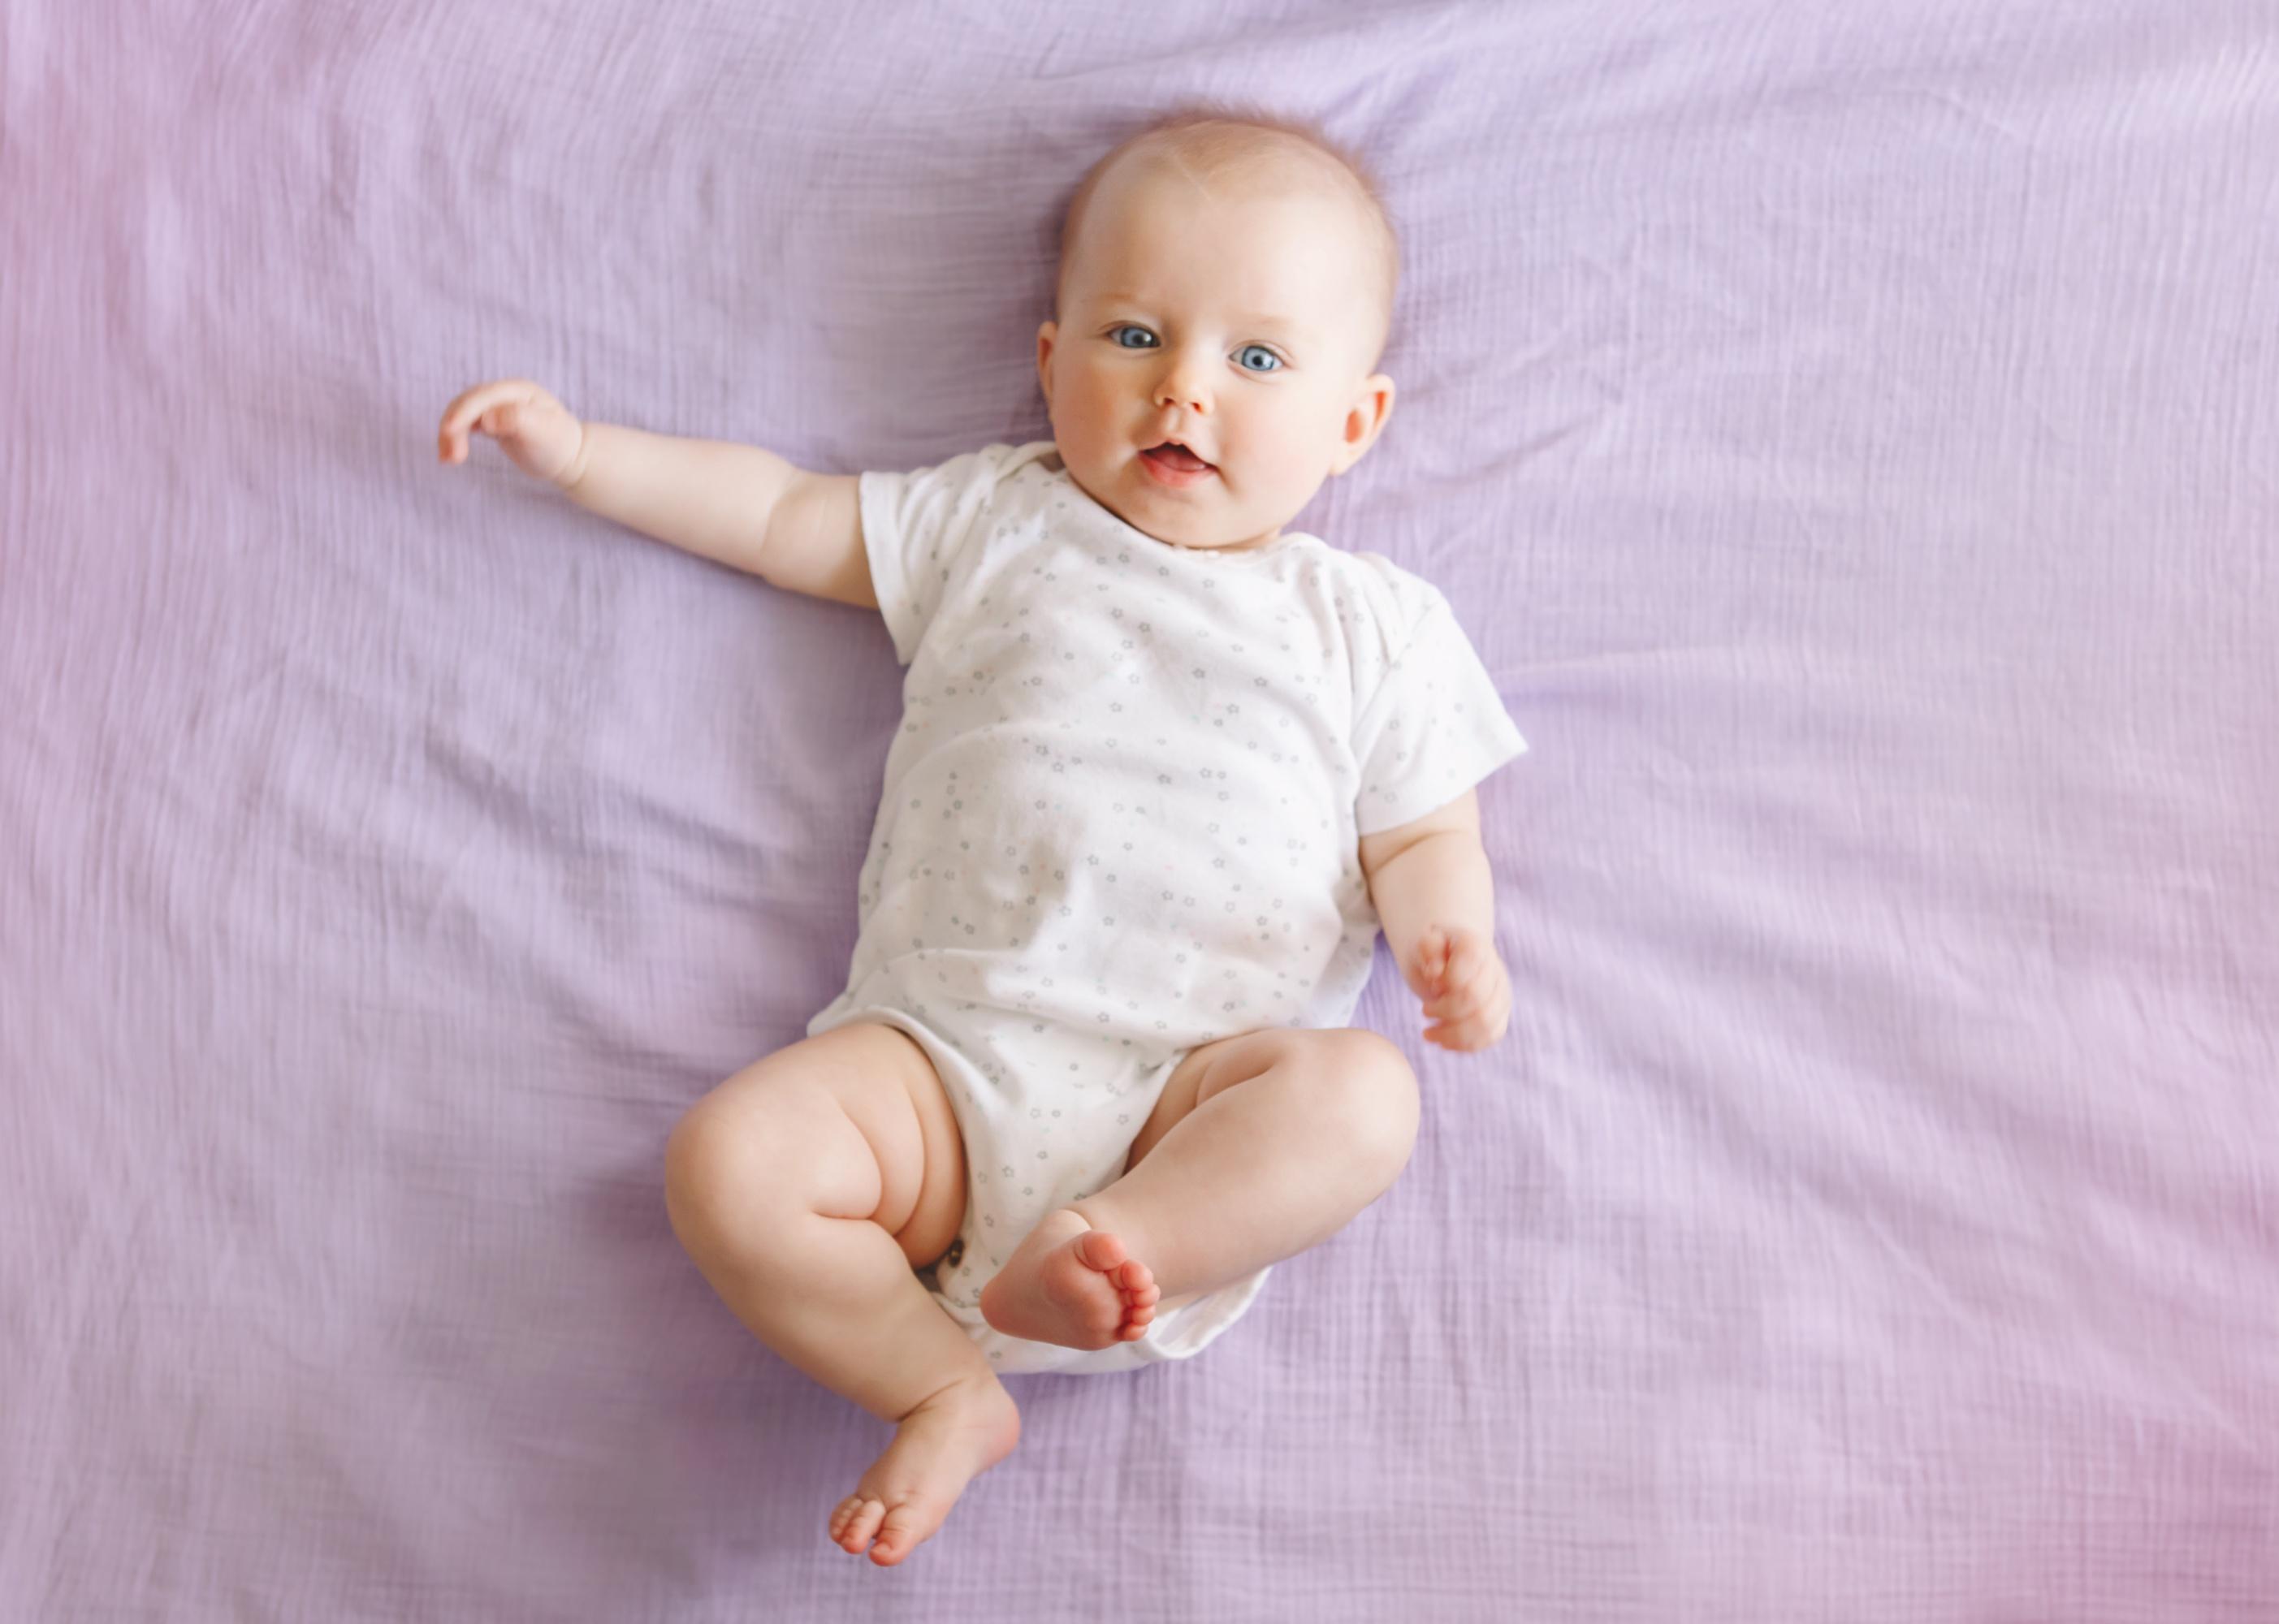 Smiling baby with blue eyes on purple bedding. 